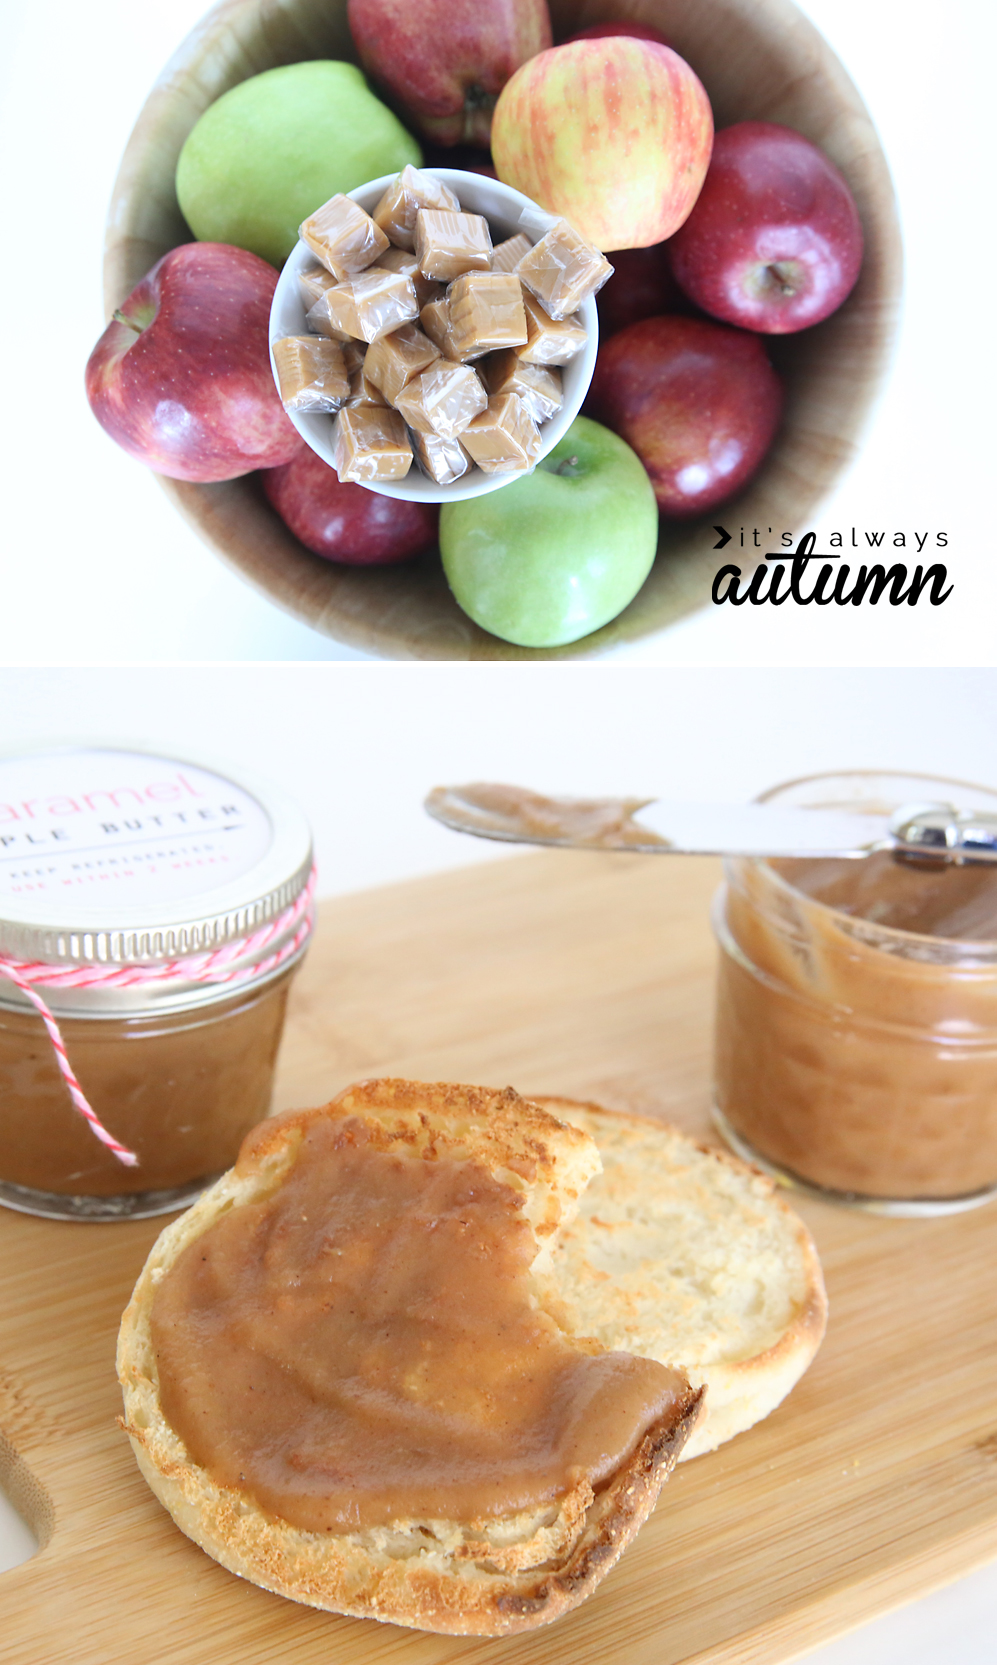 Collage: bowl of apples with small bowl of caramels; English muffin spread with caramel apple butter